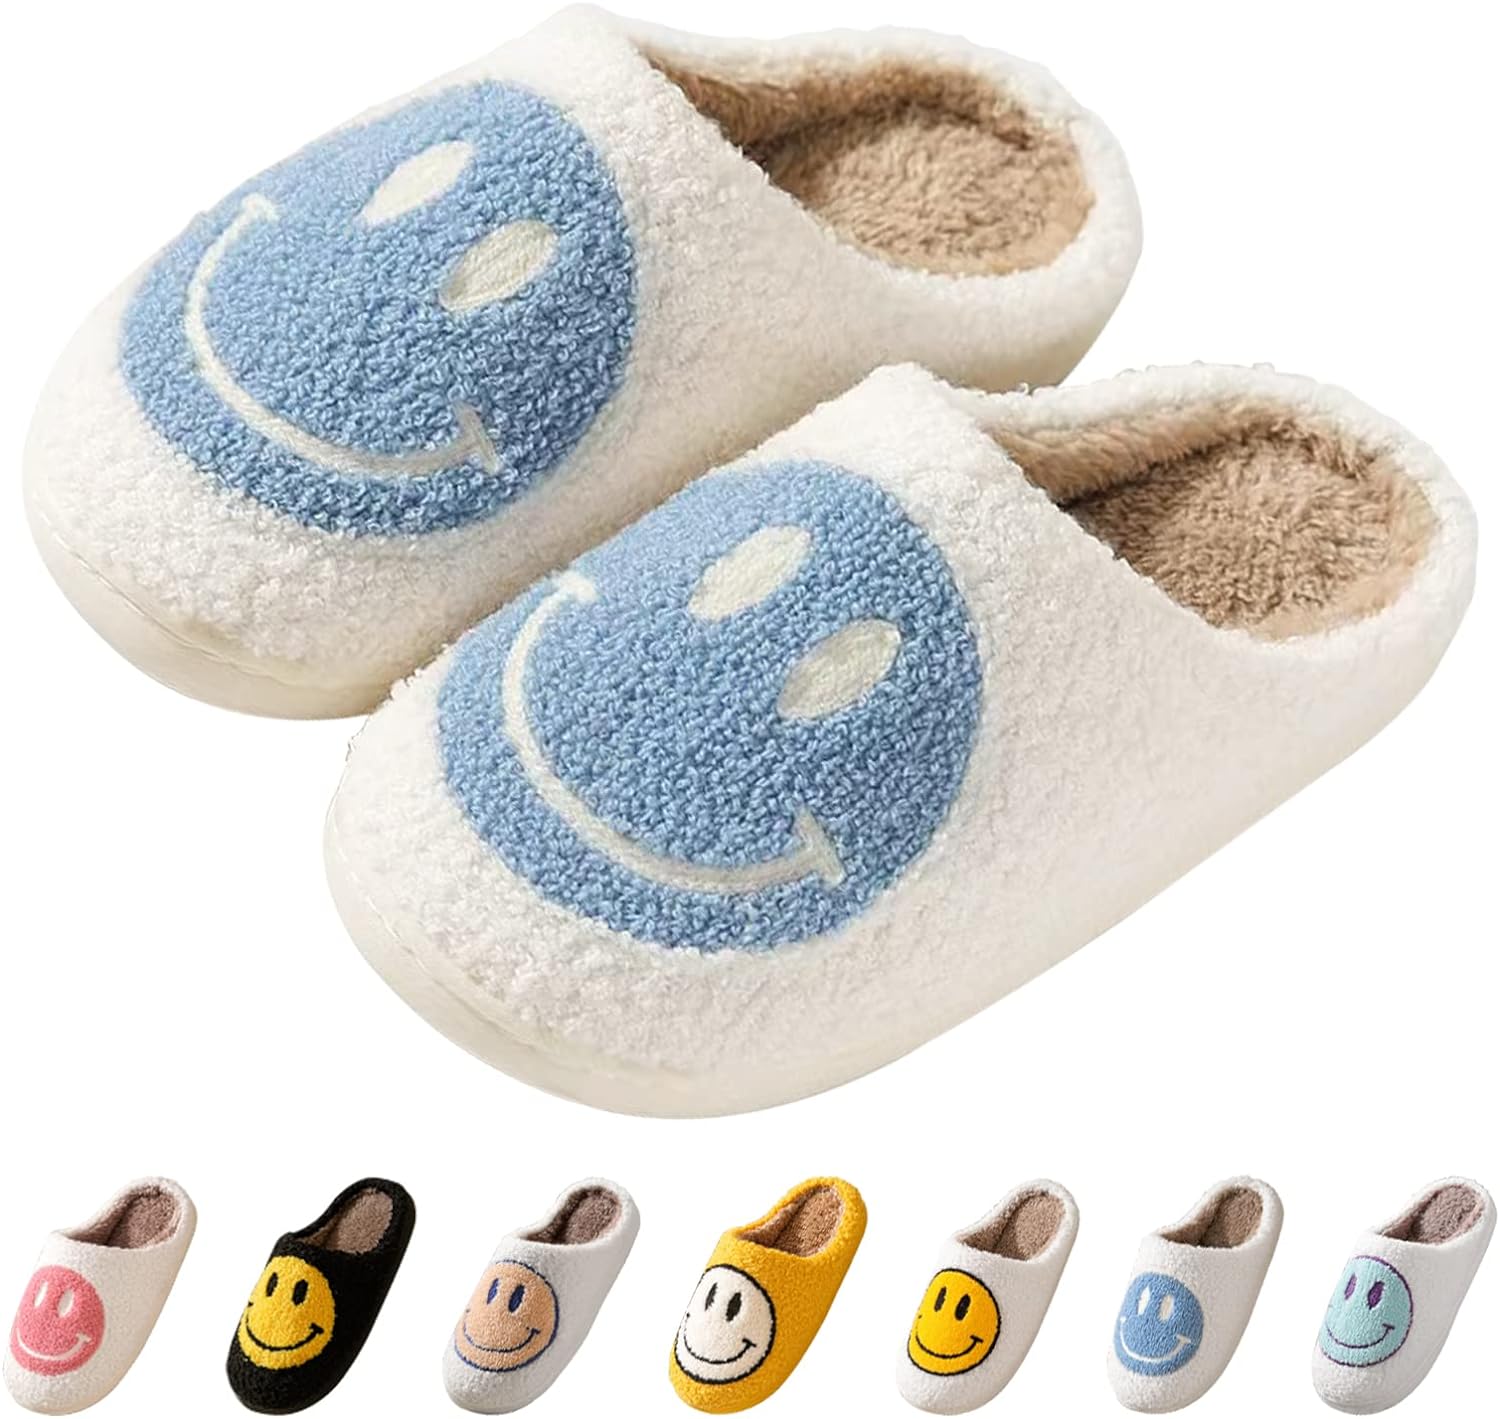 The Joyful Footwear A Journey into the World of Smiley Face Slippers